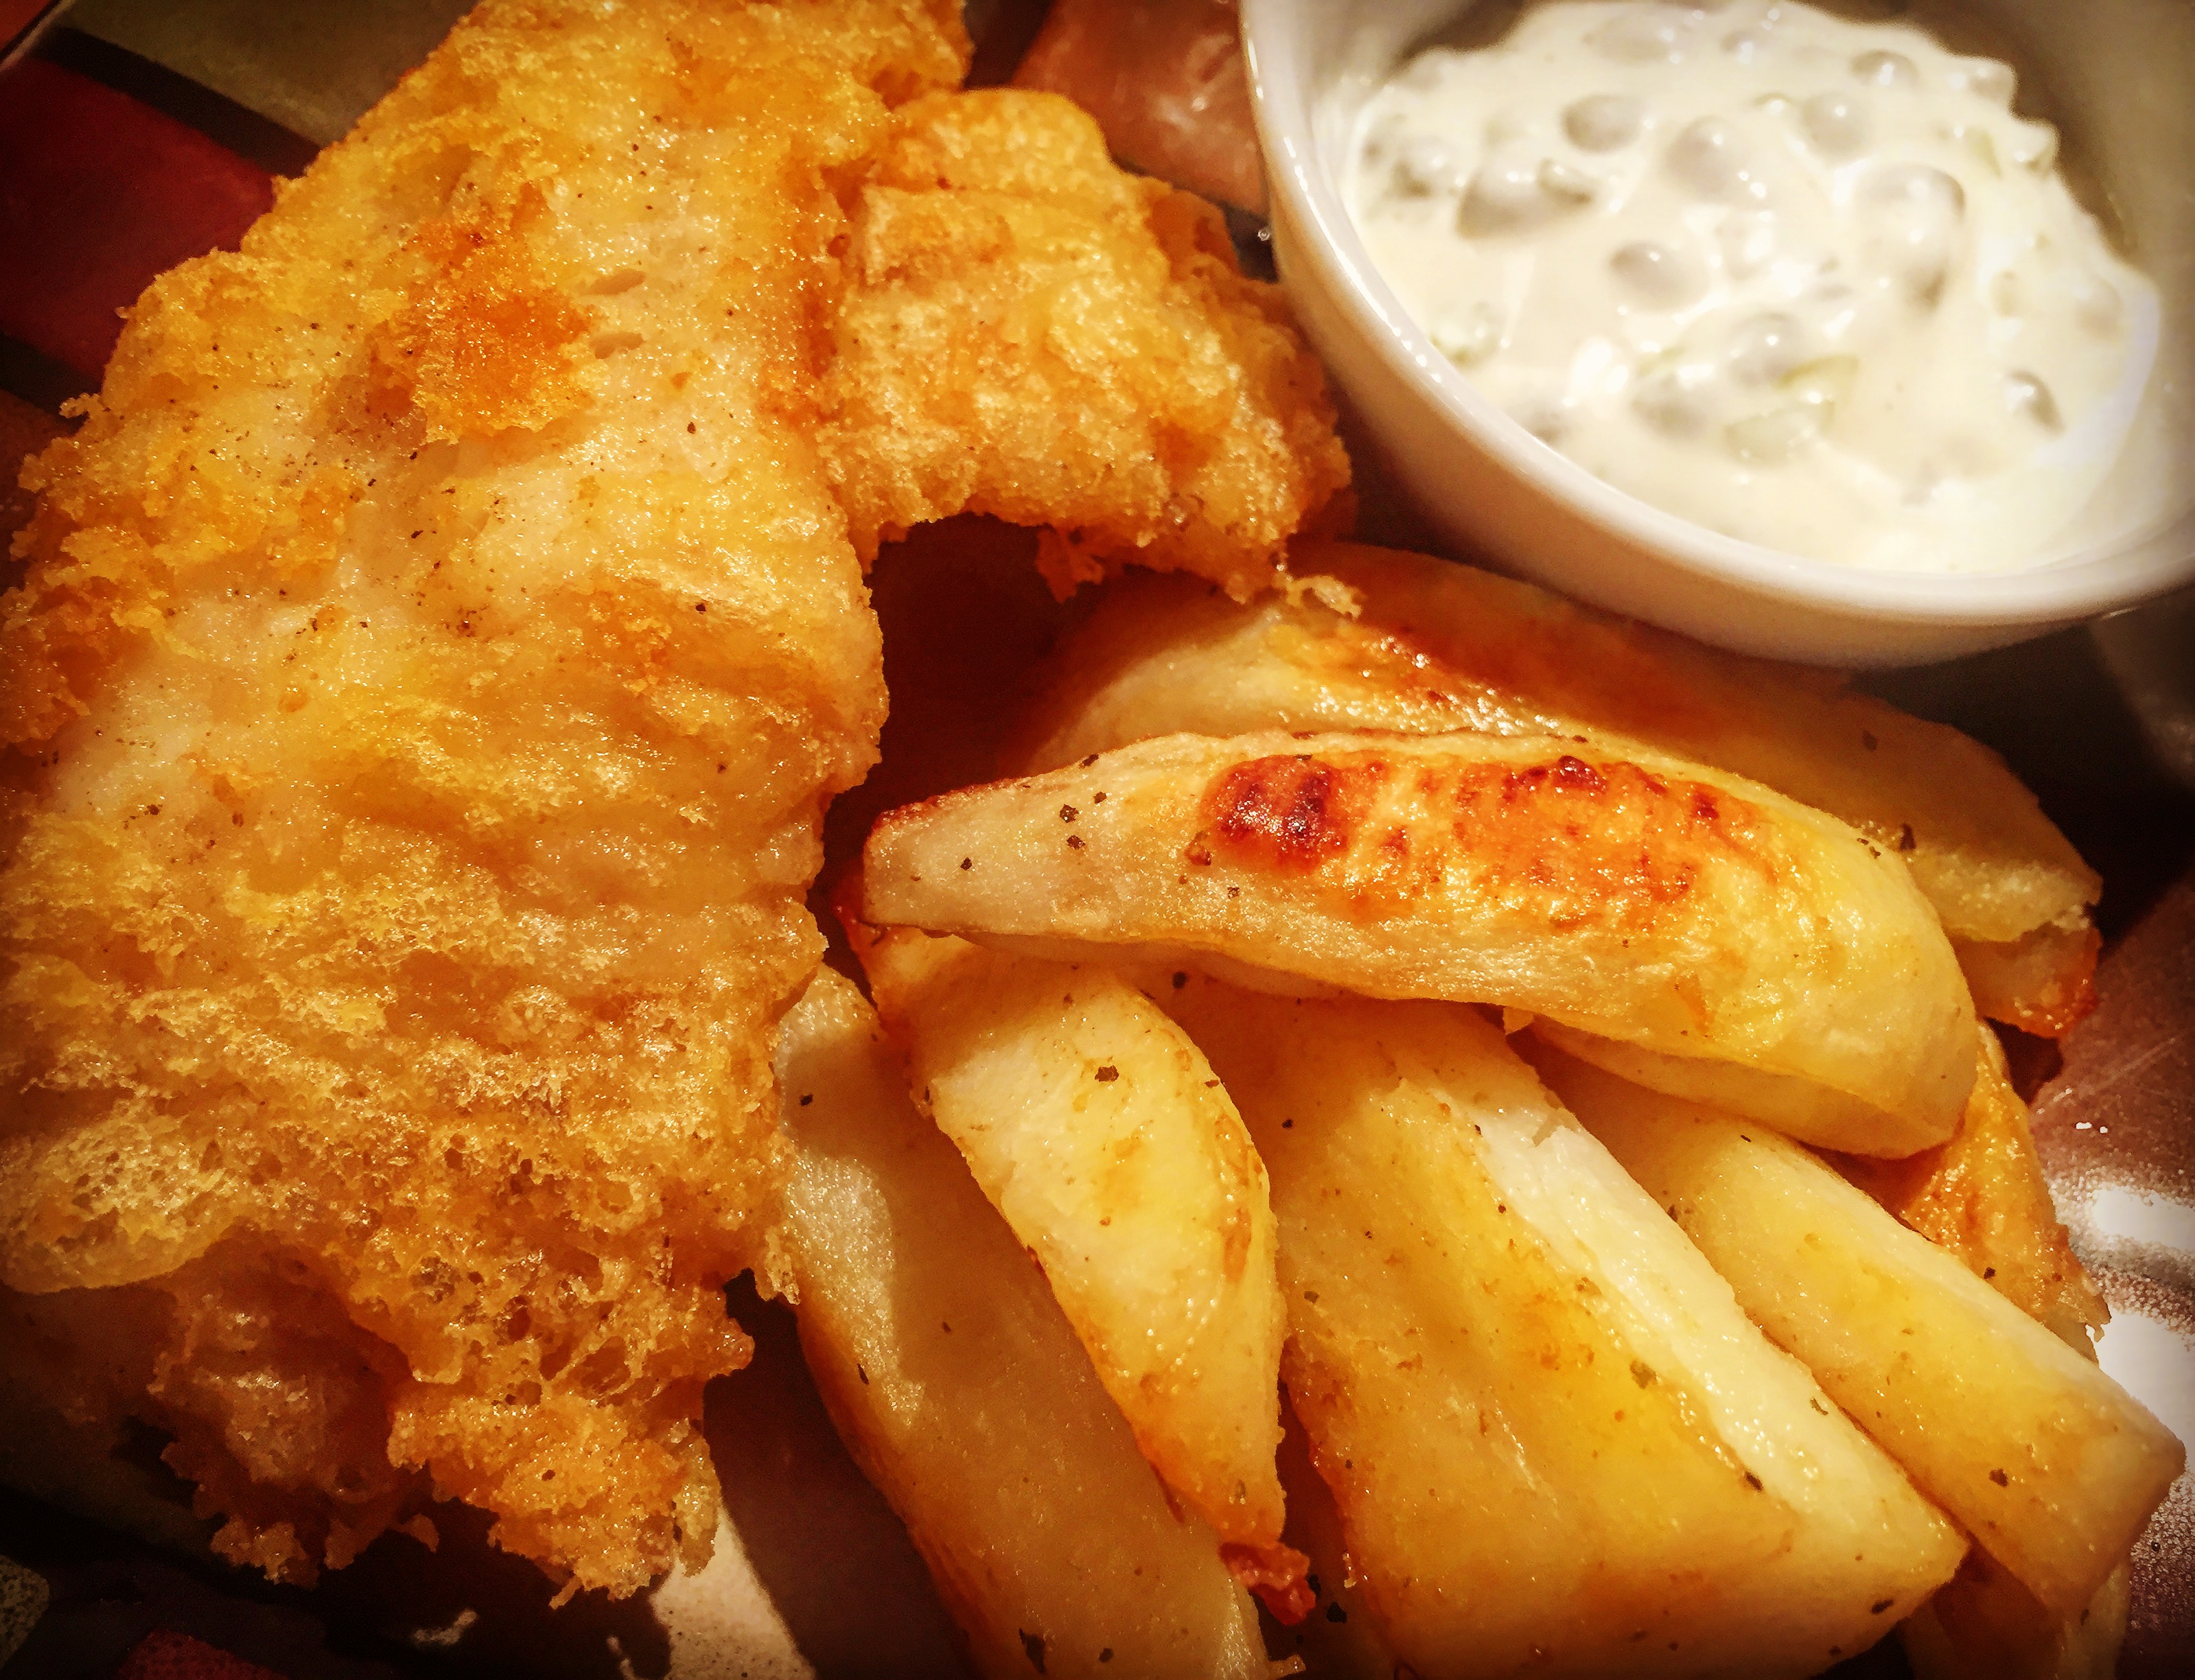 Gluten free fish and chips with homemade dairy free tartar sauce